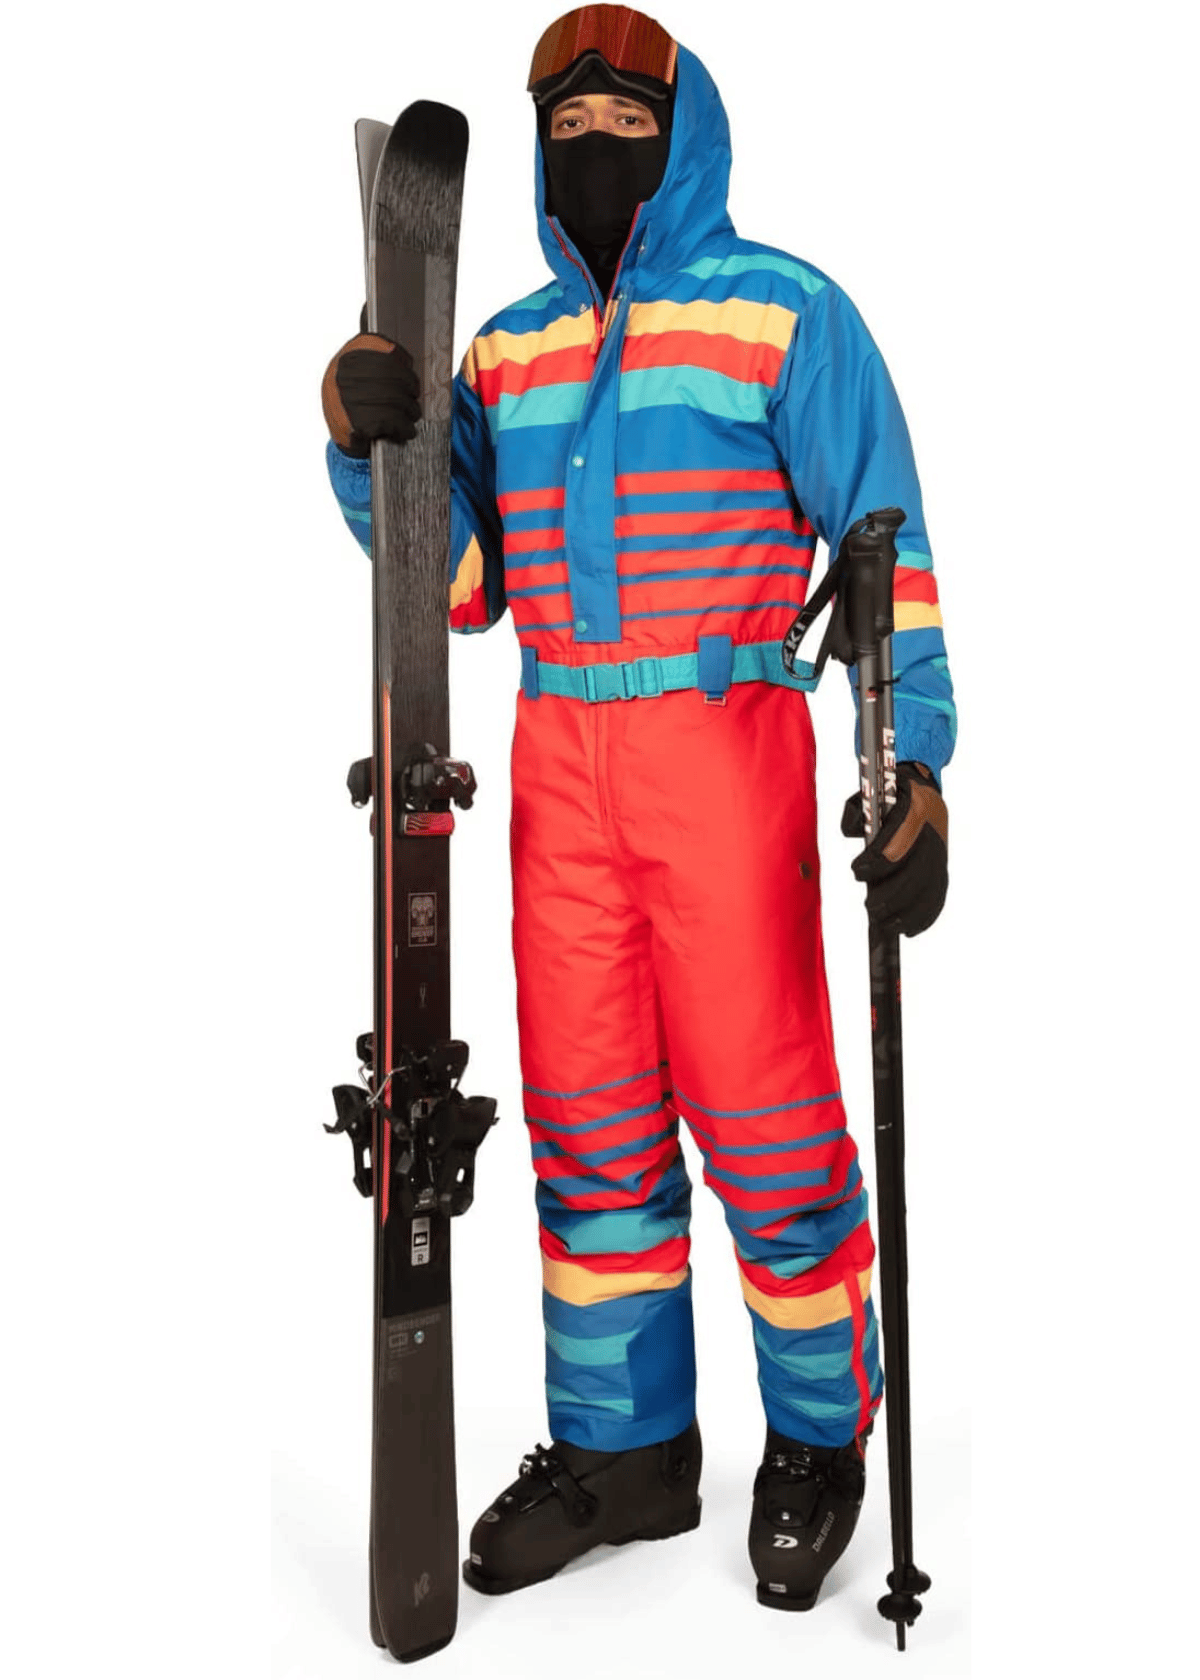 Guide to the Best Mens Ski Suit: The Season's Top Picks